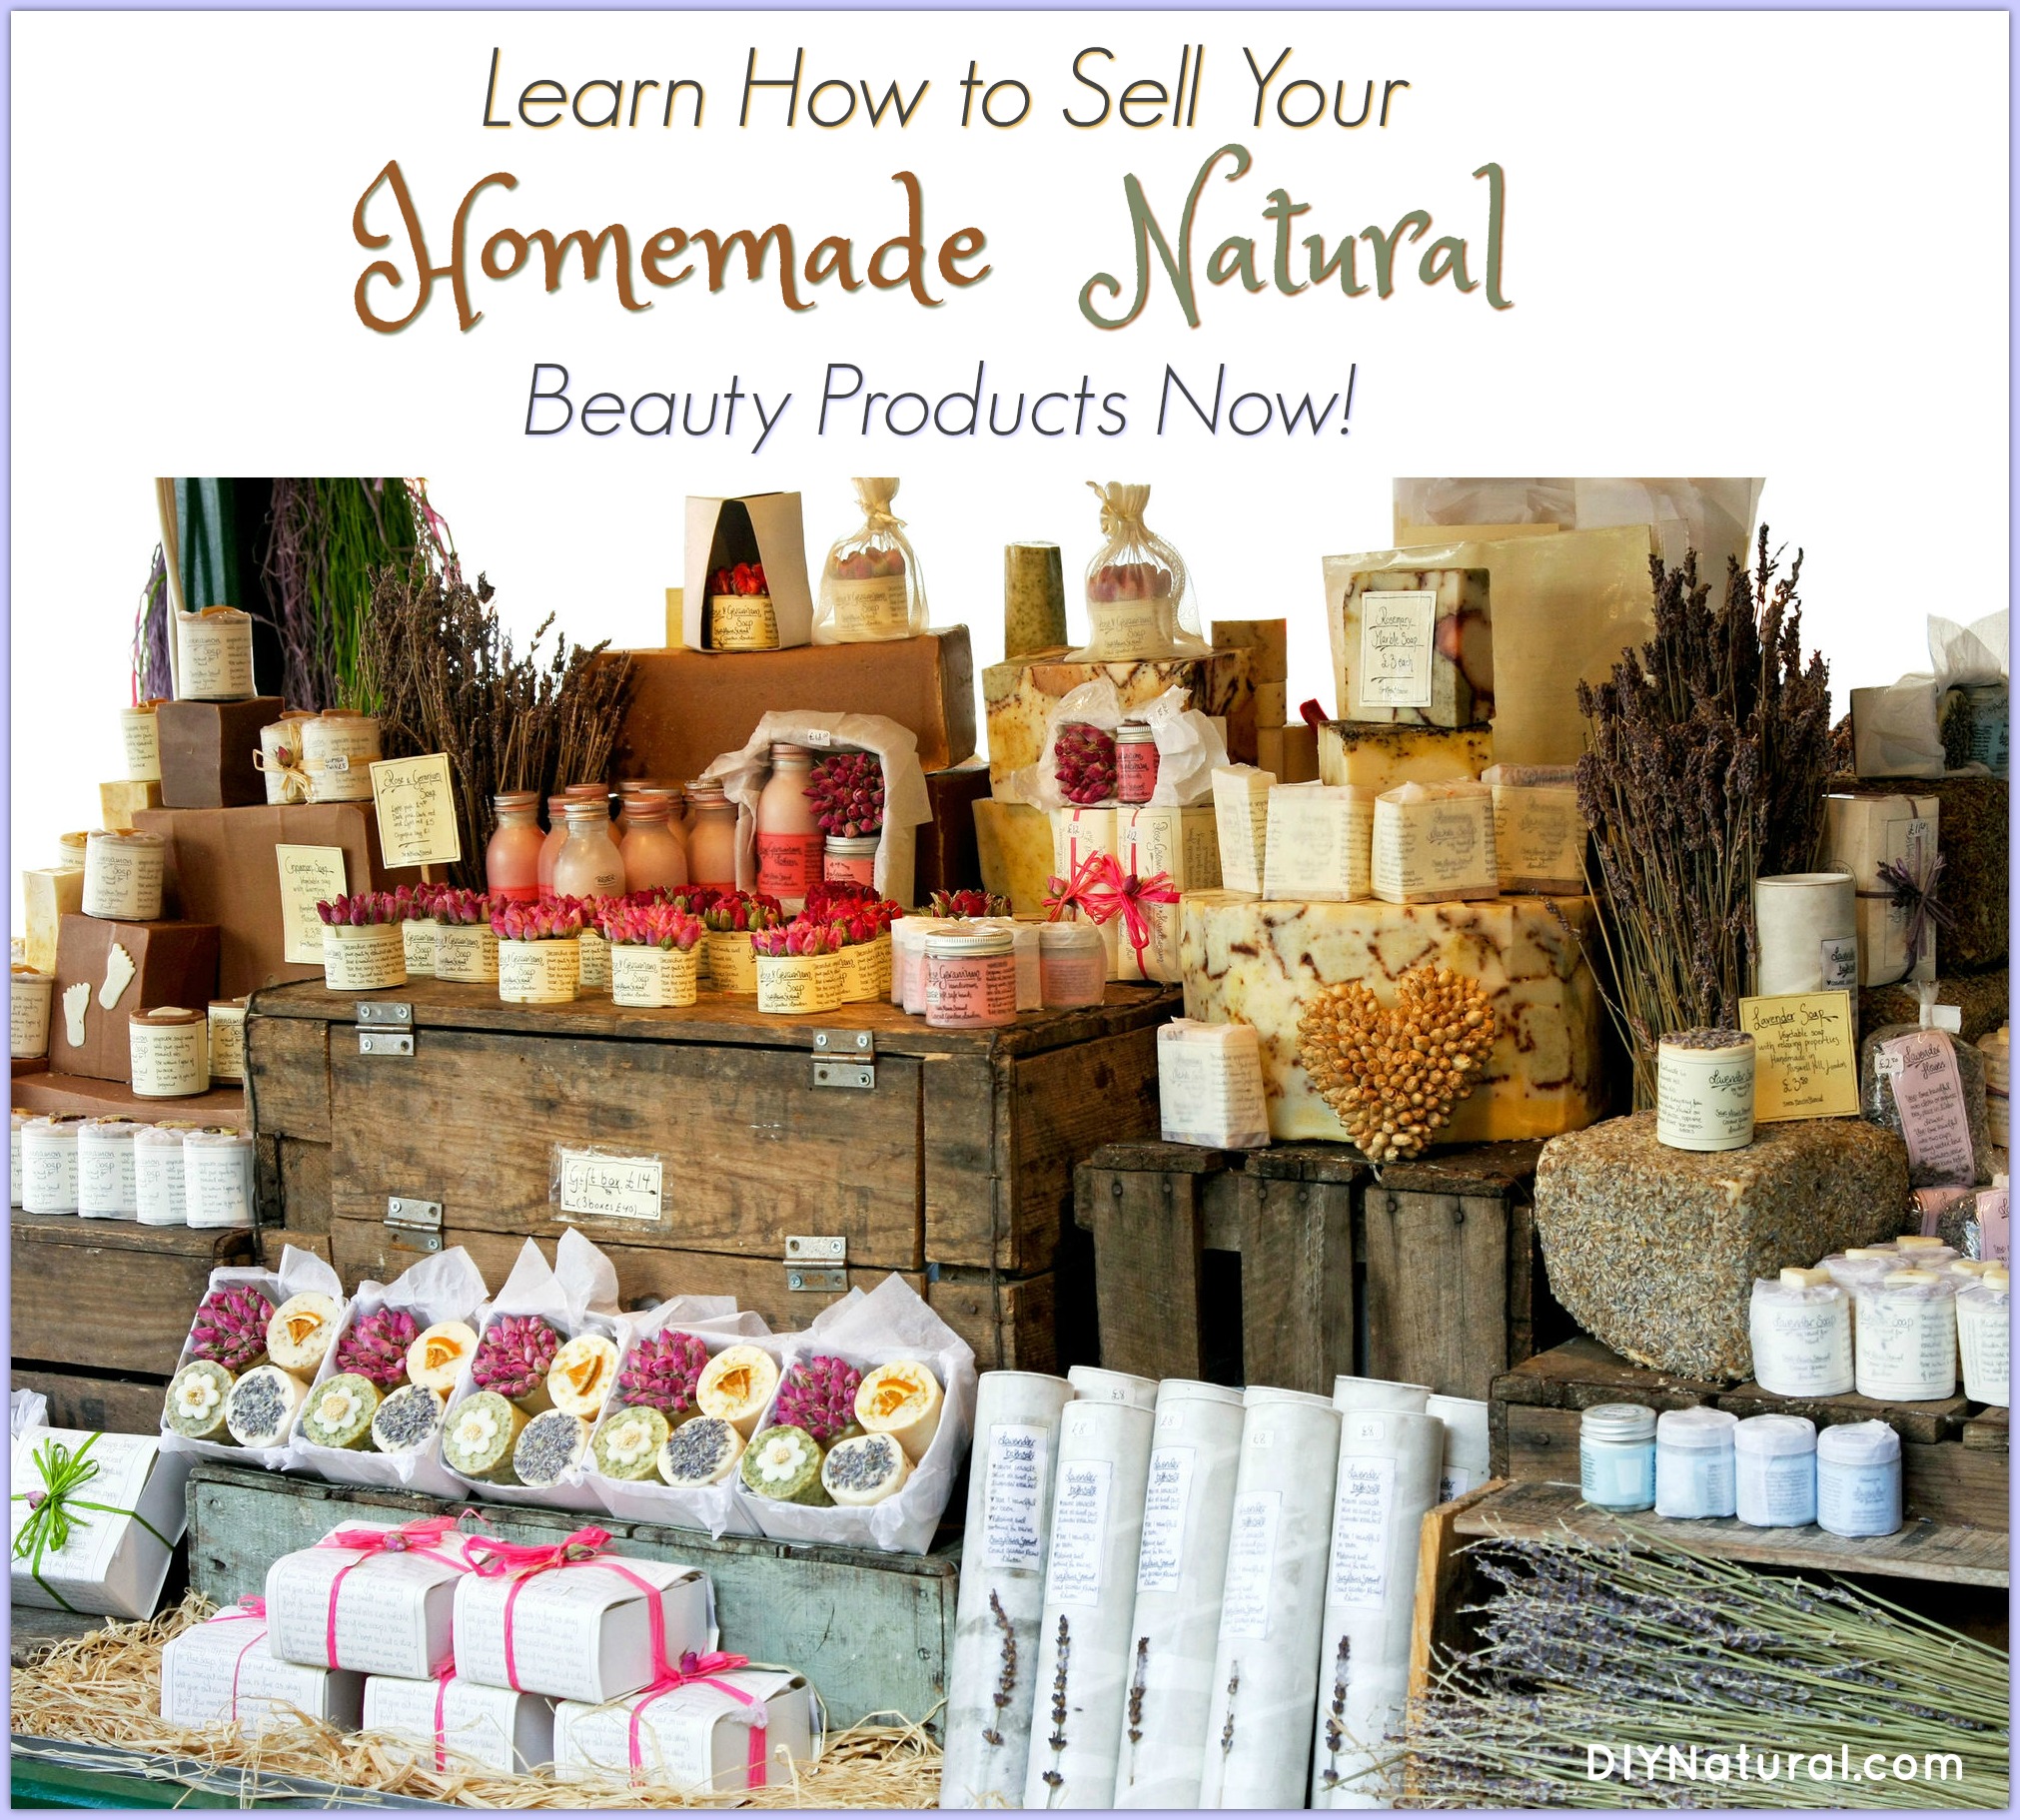 How To Sell Homemade Products: Health and Beauty Edition